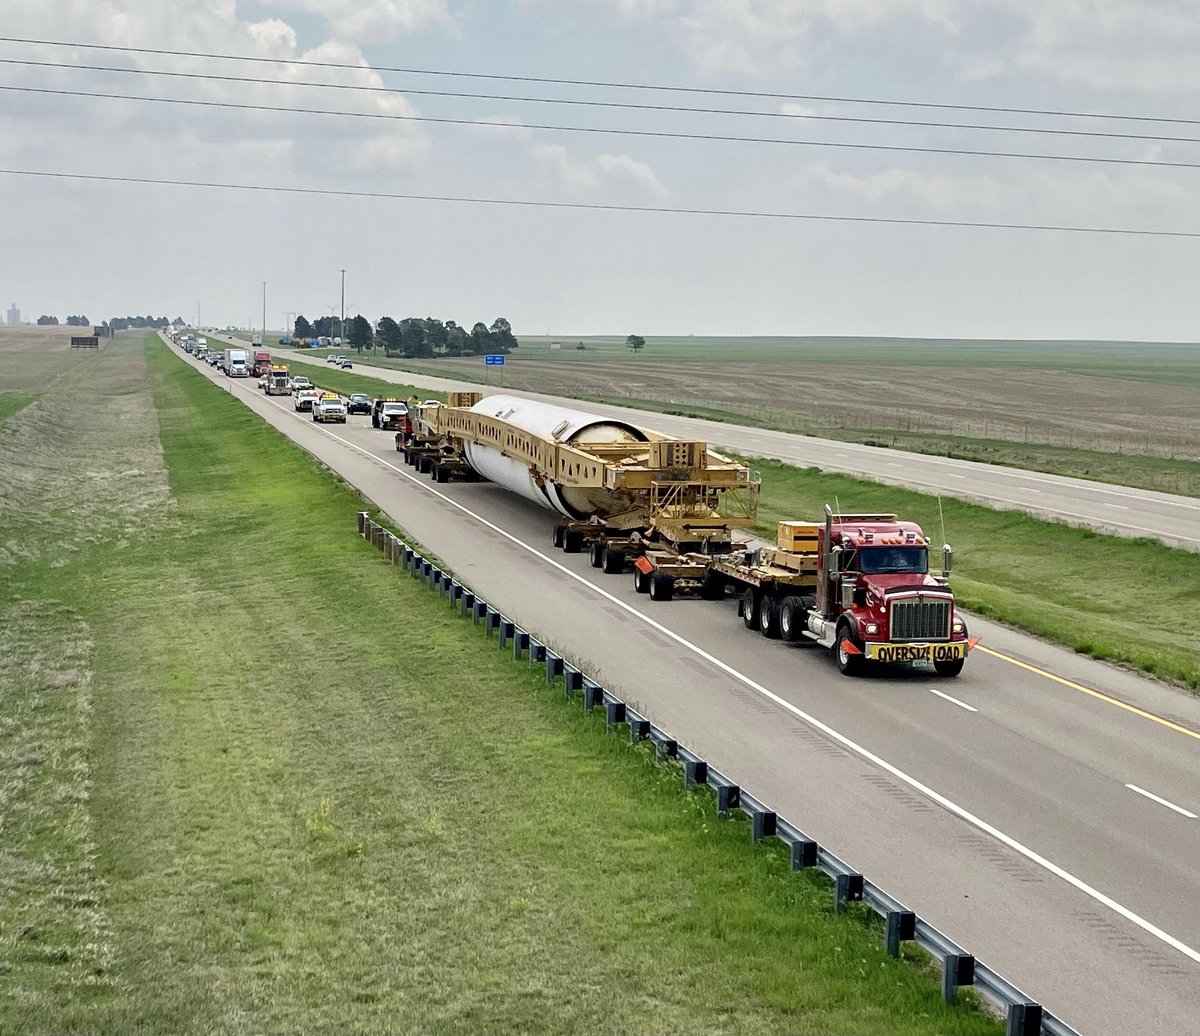 A look at the 2 SpaceX super-loads on Kansas highways. Top speeds of 45 mph and these are 16’ wide, 300’ long and 600,000 pound structures.  Tomorrow they will travel south from Oakley on U83 and will eventually leave Kansas near Elkhart. 

Not sure when they leave tomorrow.